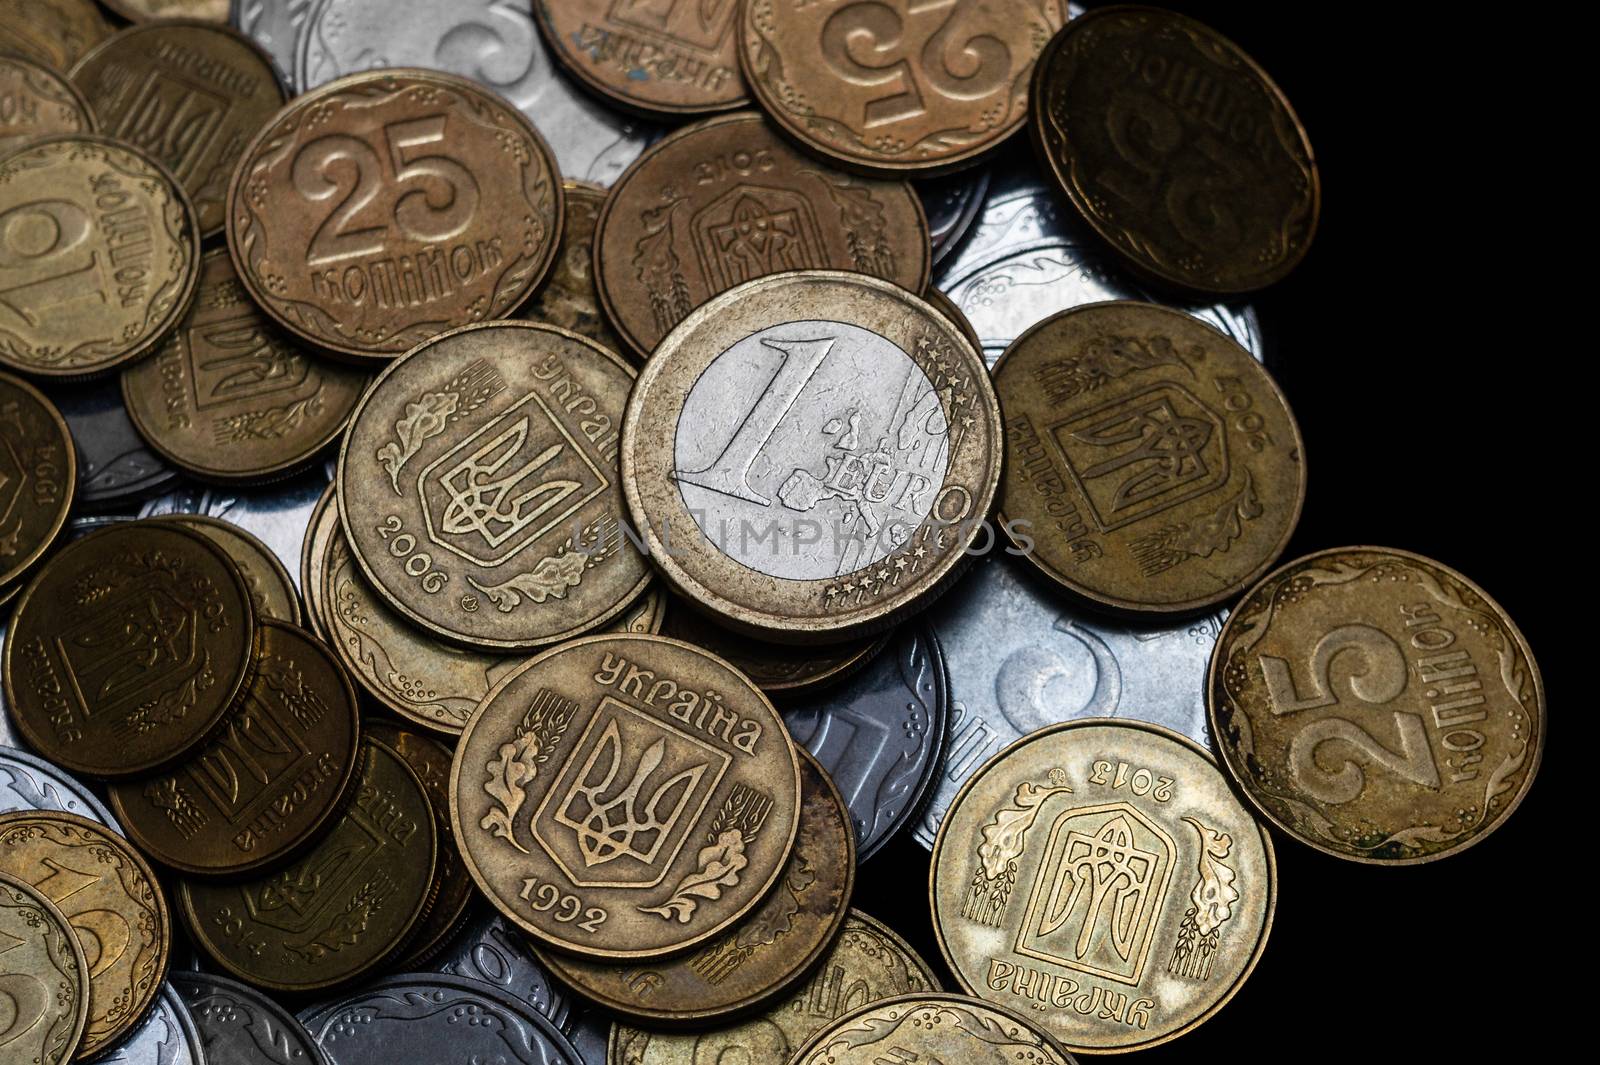 Ukrainian coins with one euro coin isolated on black background. Close-up view. Coins are located at center of frame. A conceptual image.